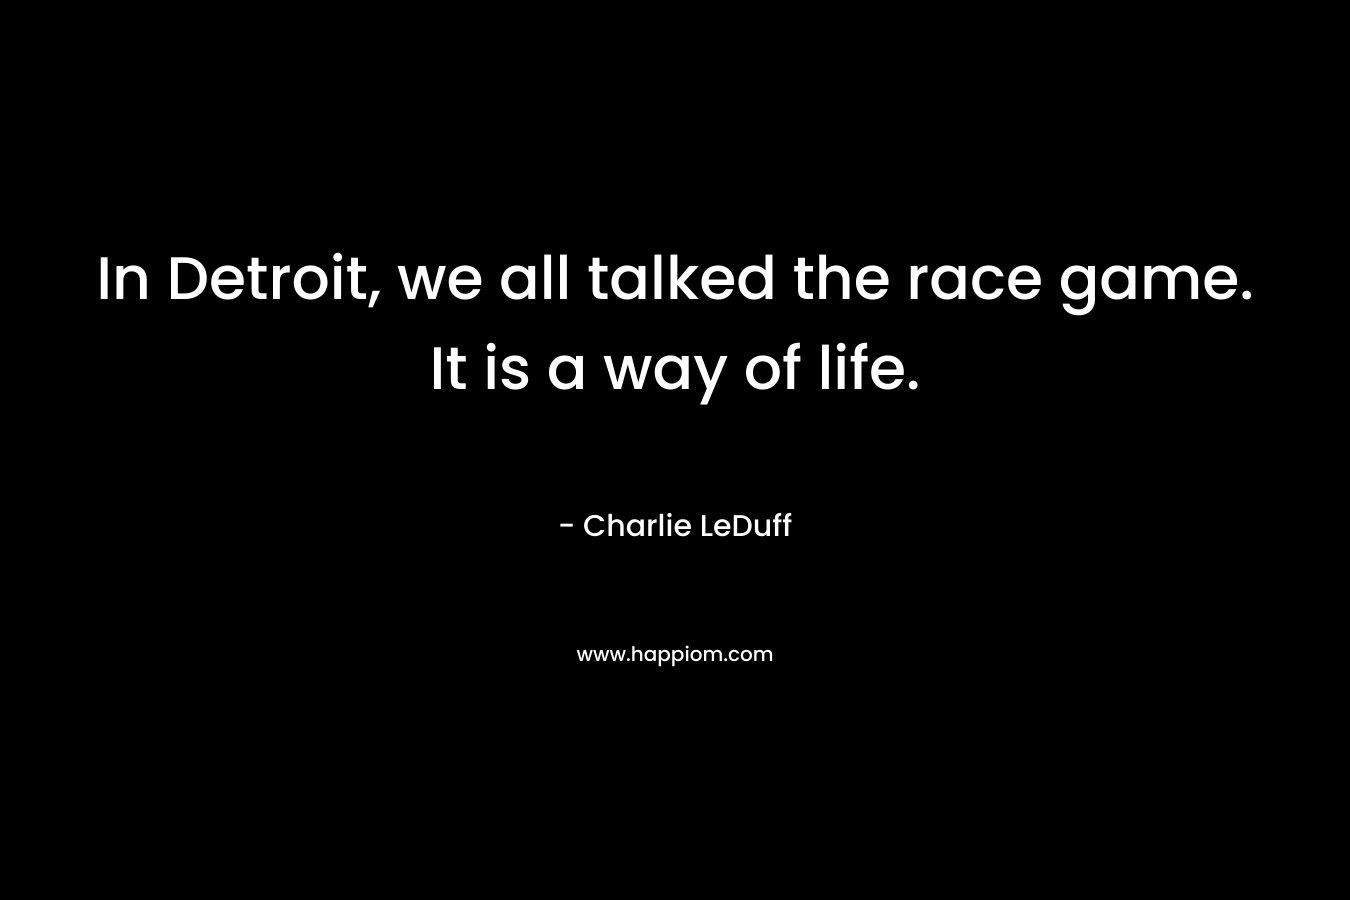 In Detroit, we all talked the race game. It is a way of life.